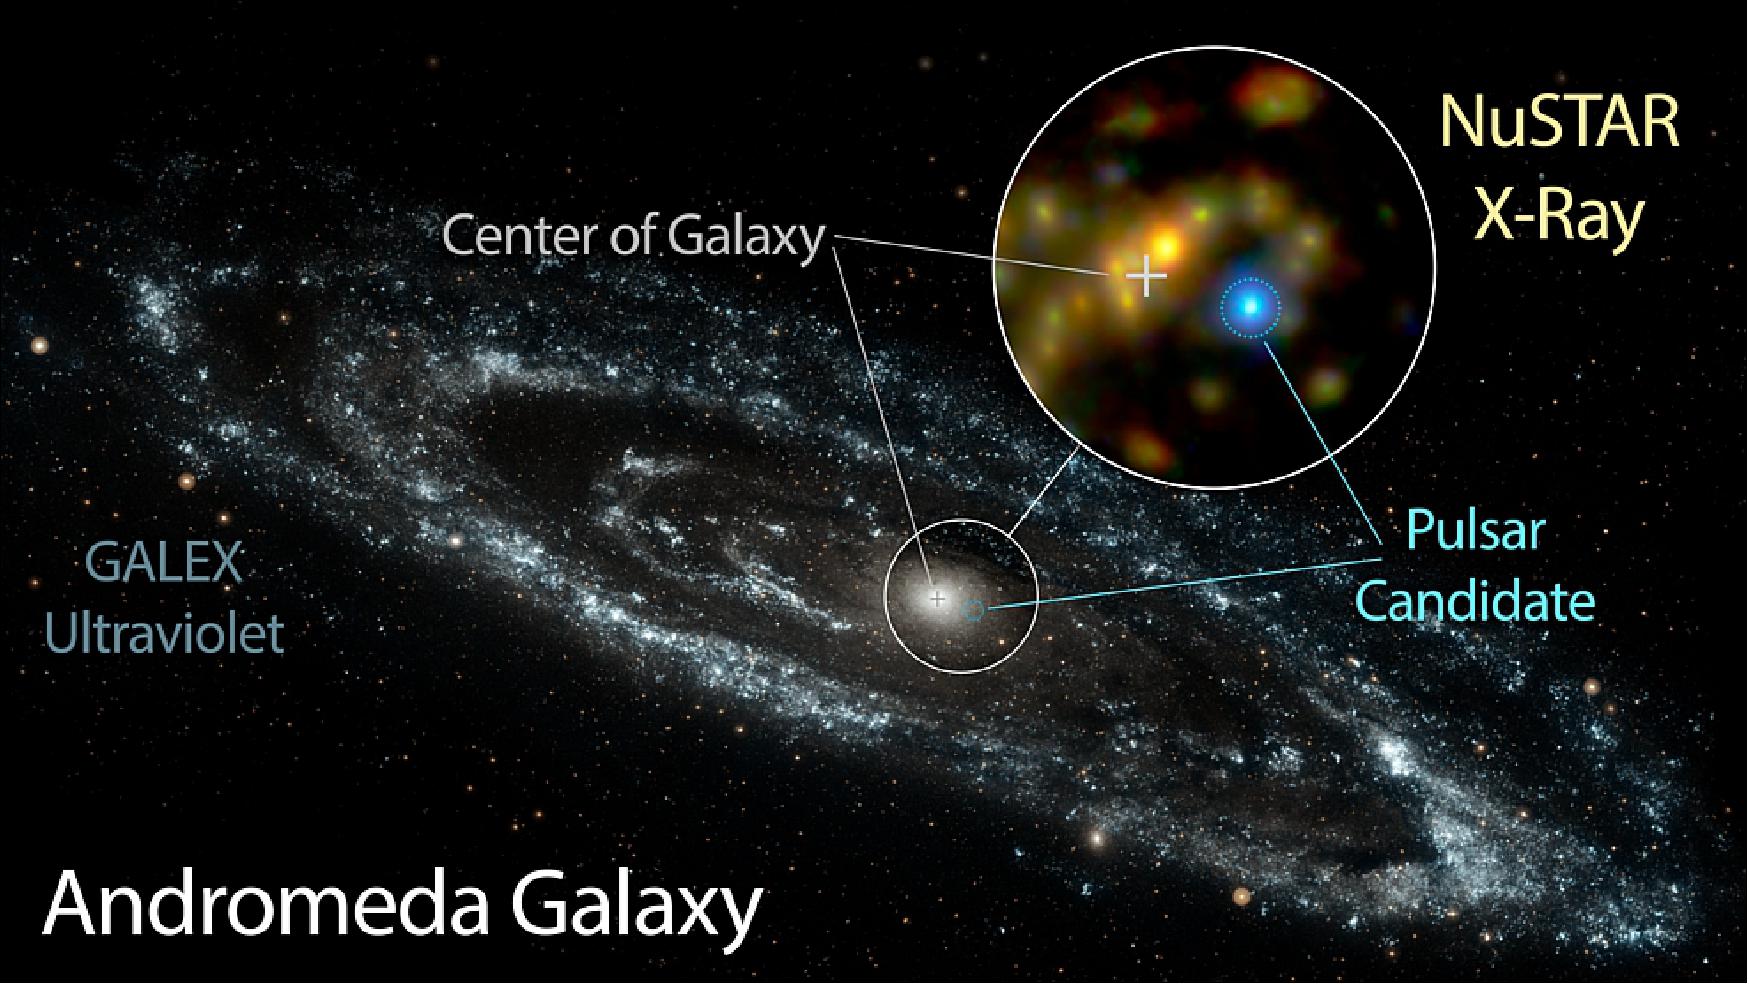 Figure 28: NuSTAR has identified a candidate pulsar in Andromeda — the nearest large galaxy to the Milky Way. This likely pulsar is brighter at high energies than the Andromeda galaxy's entire black hole population (image credit: NASA/JPL-Caltech/GSFC/JHU)